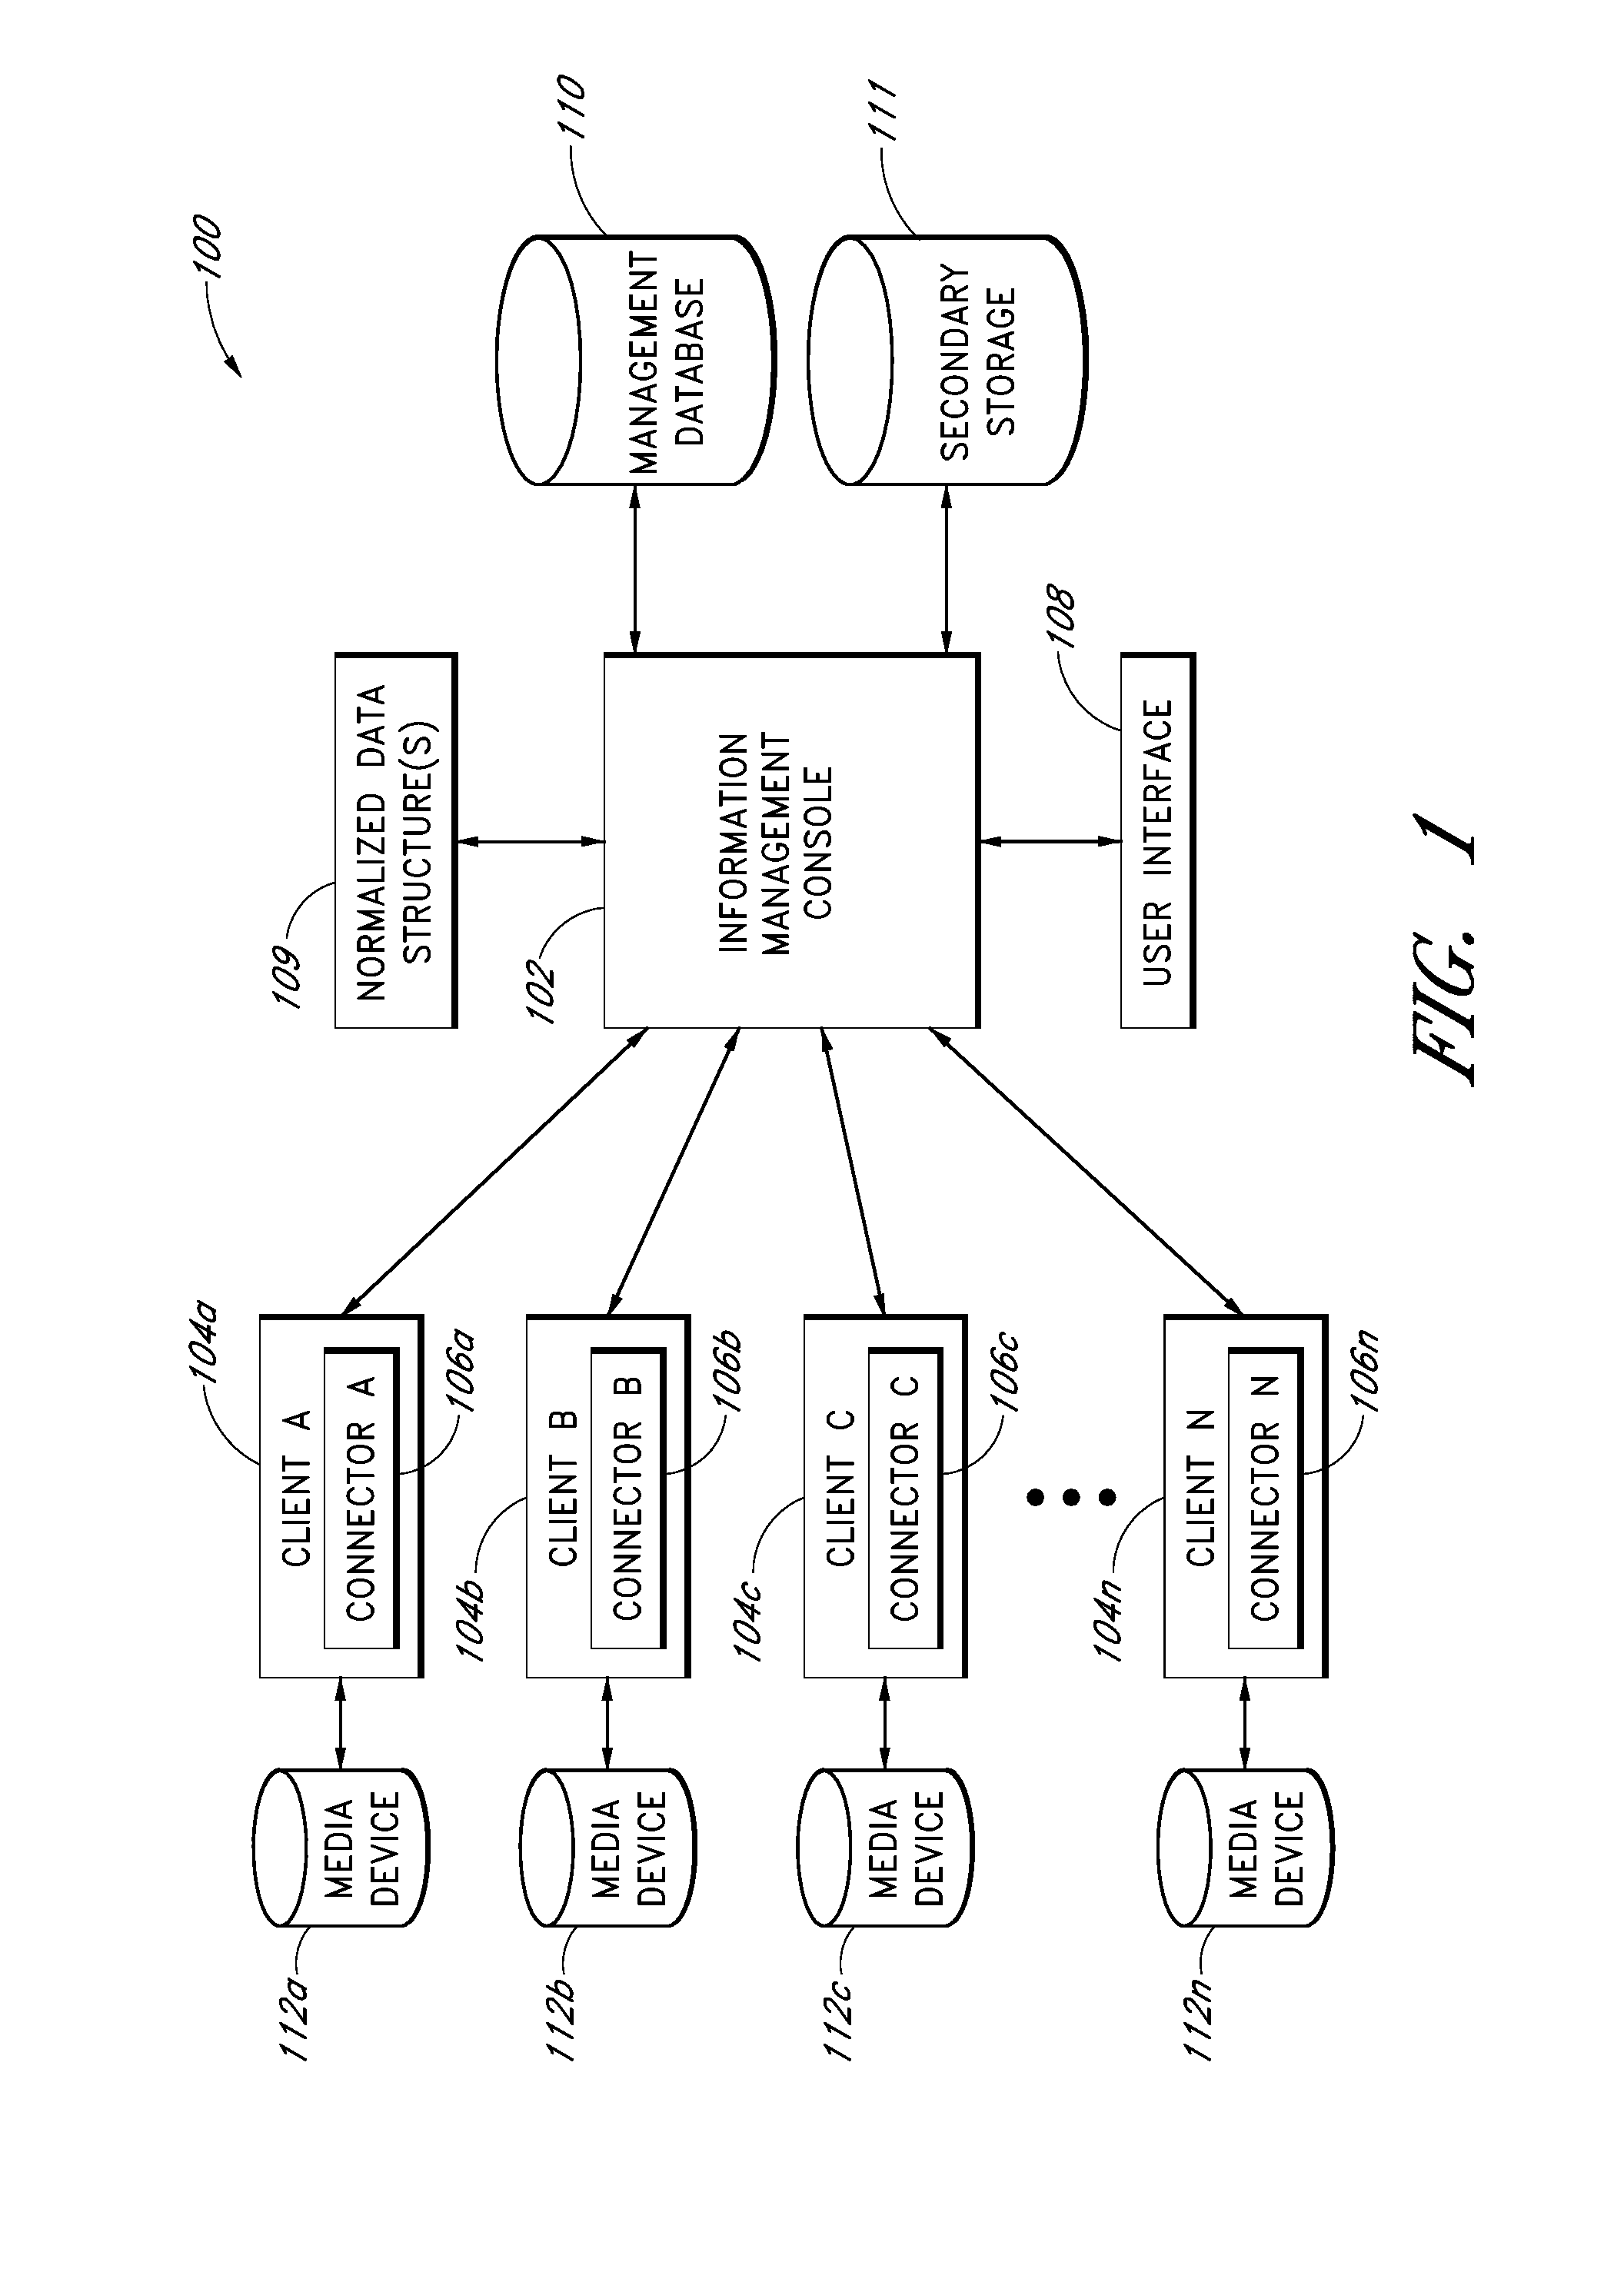 Data mining systems and methods for heterogeneous data sources